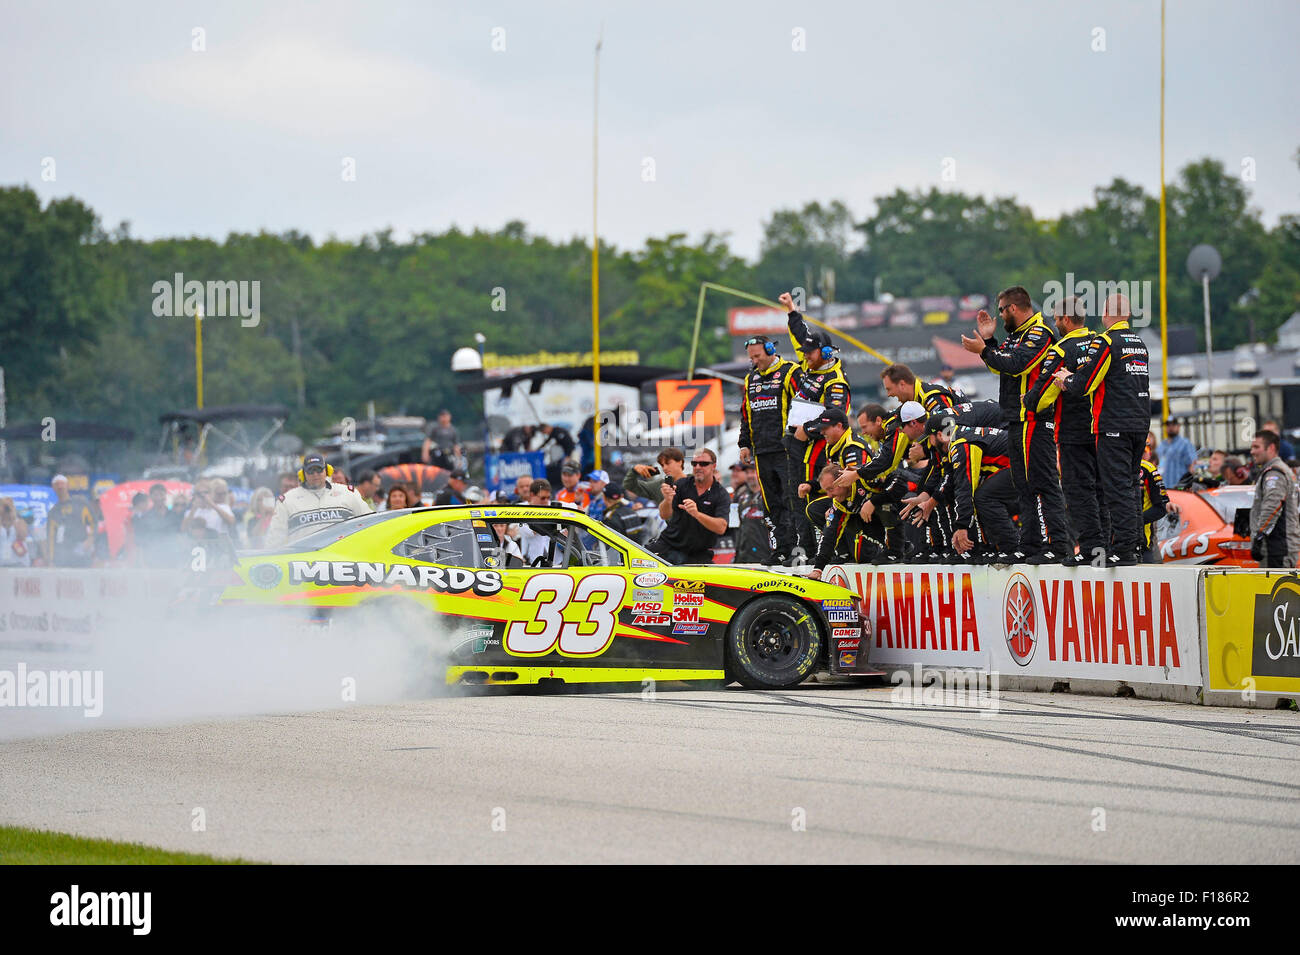 Elkhart Lake, WI, USA. 29th Aug, 2015. Elkhart Lake, WI - Aug 29, 2015: Paul Menard (33) celebrates with a burnout after winning the Road America 180 Fired up by Johnsonville after leading the field through across the finish line in the Richmond/Menards Chevy at Road America in Elkhart Lake, WI. © csm/Alamy Live News Stock Photo